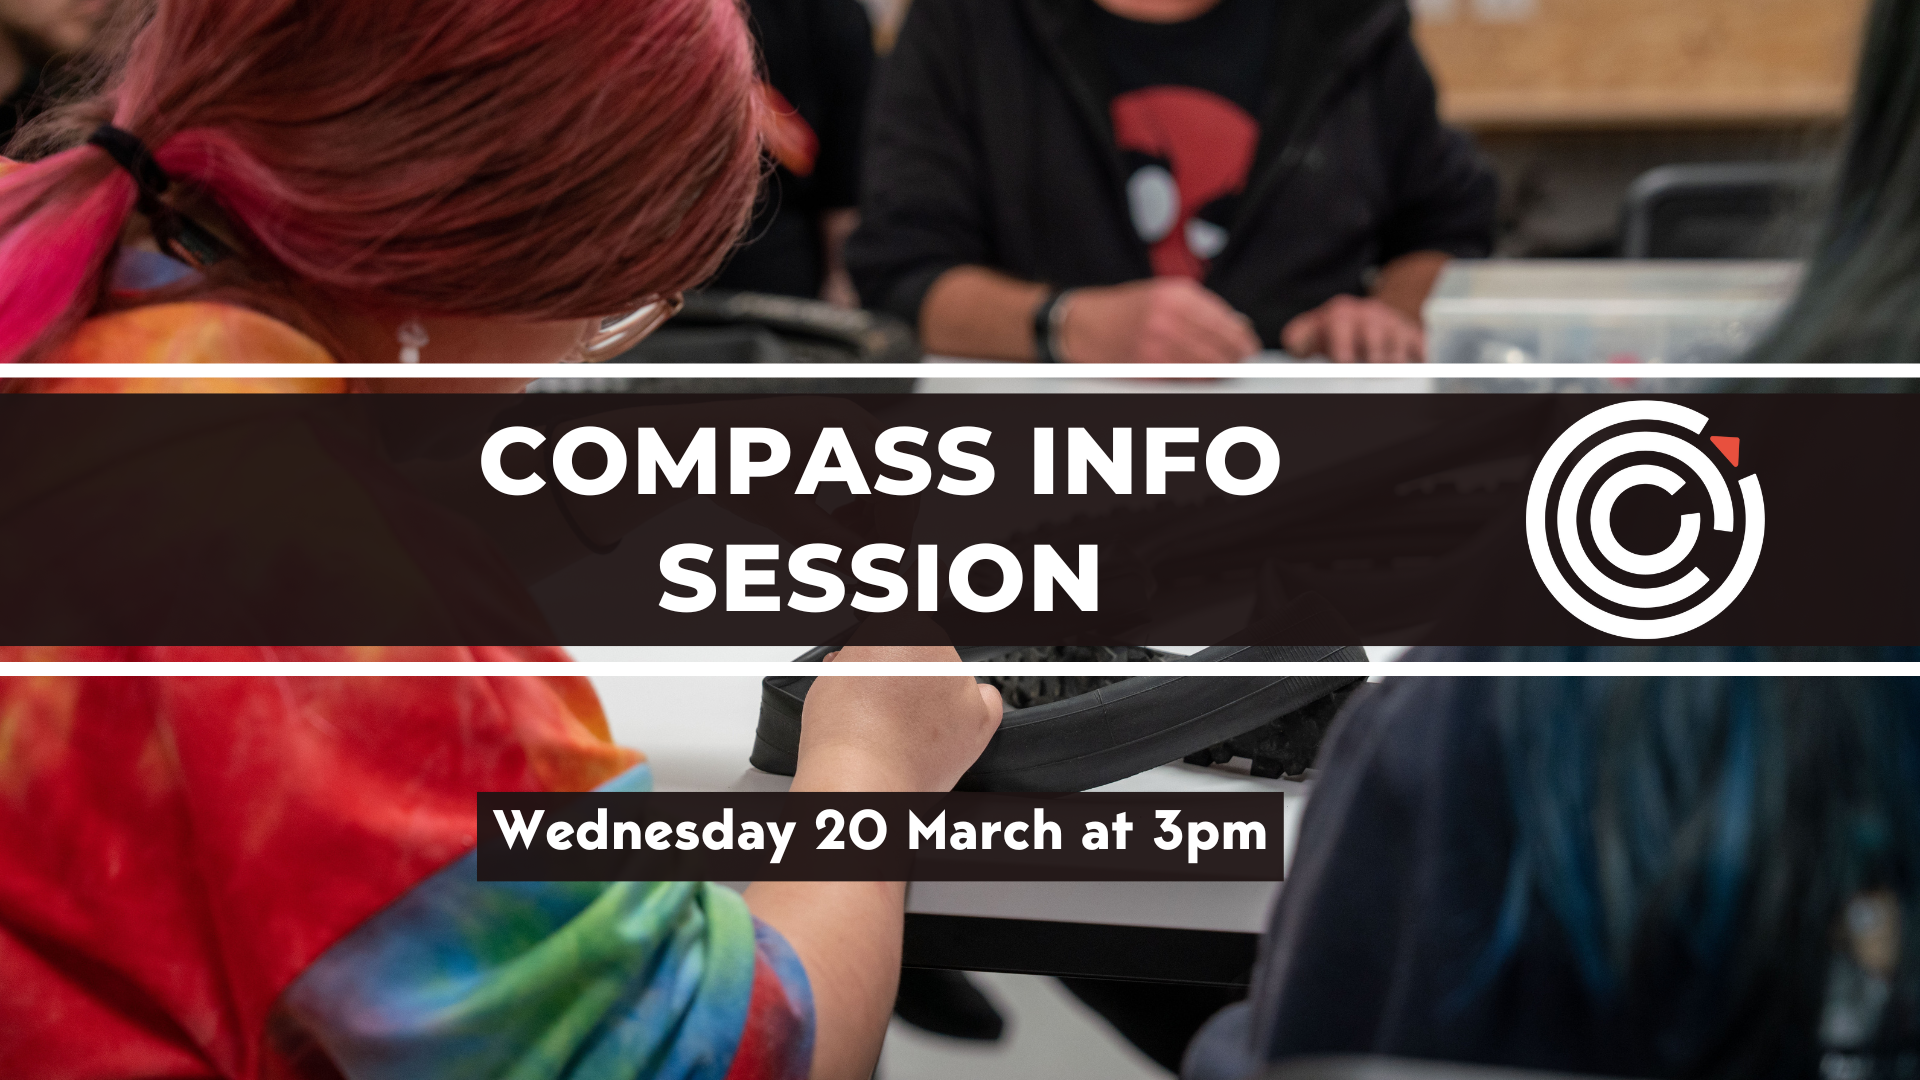 Compass Info Session - Wddnesday 20 March